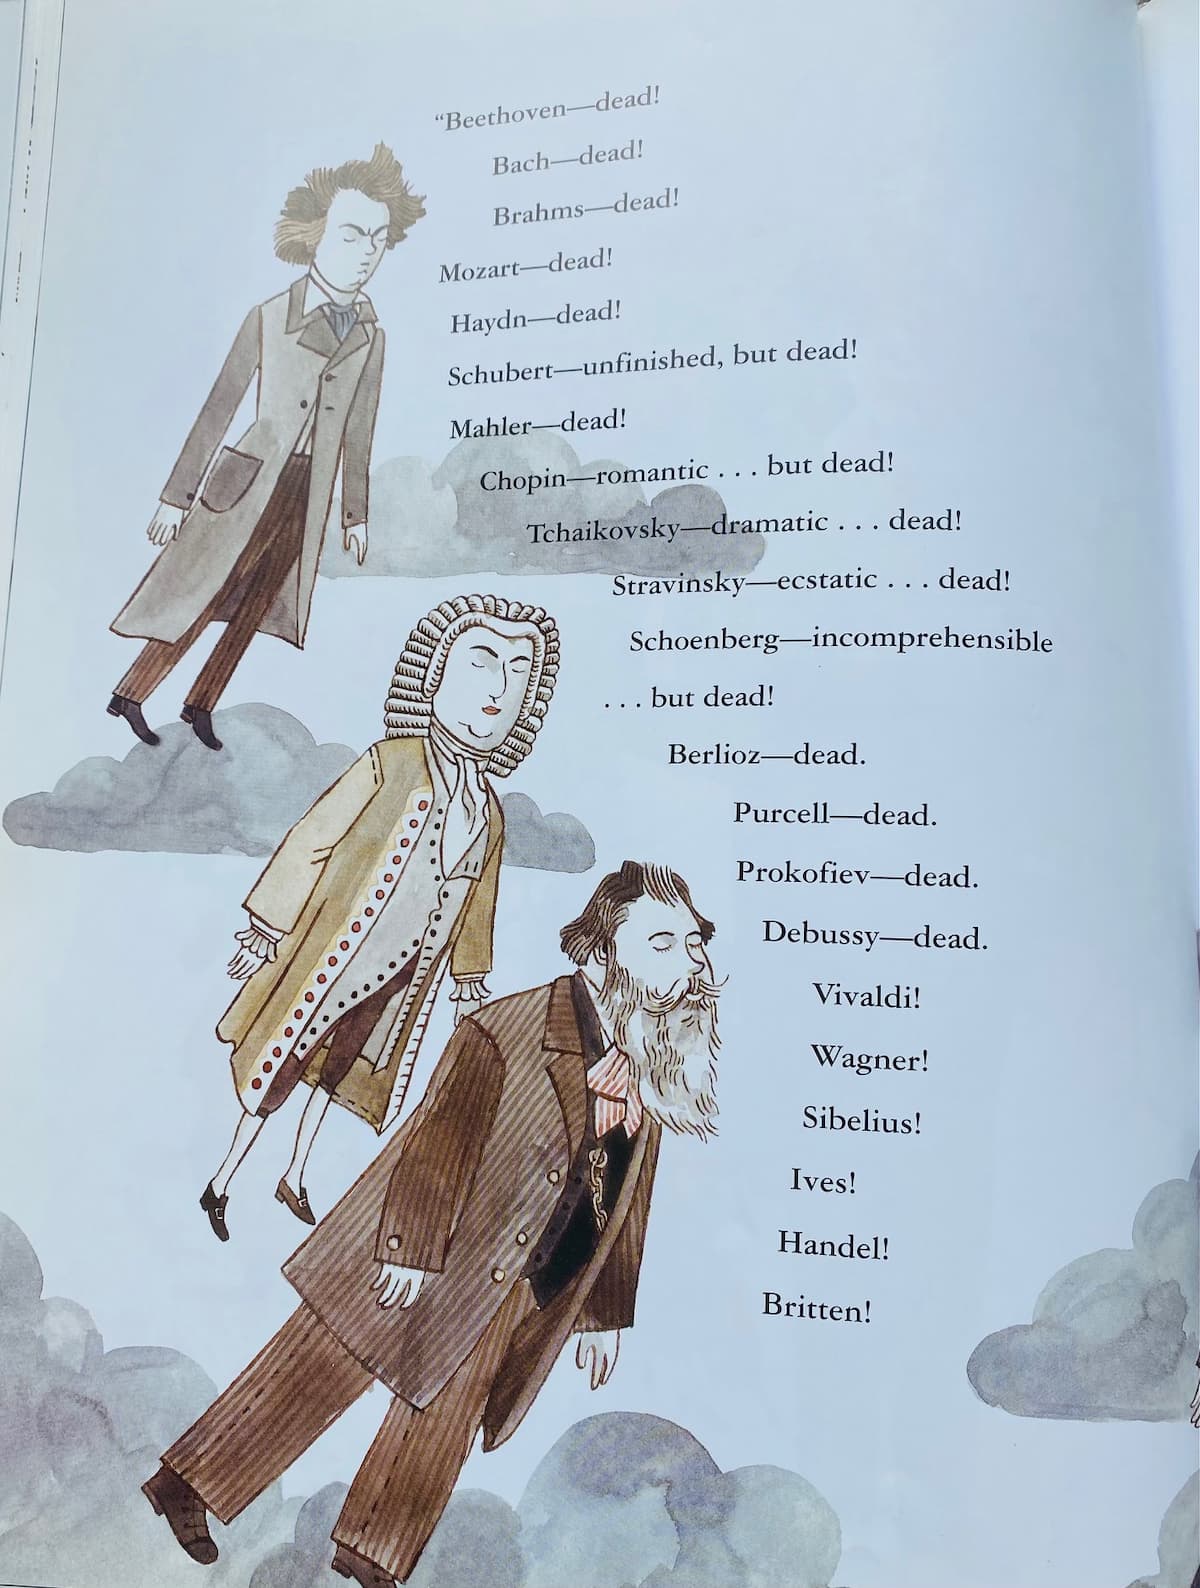 "The Composer is Dead", written by Lemony Snicket, published by HarperCollins and illustrated by Carson Ellis